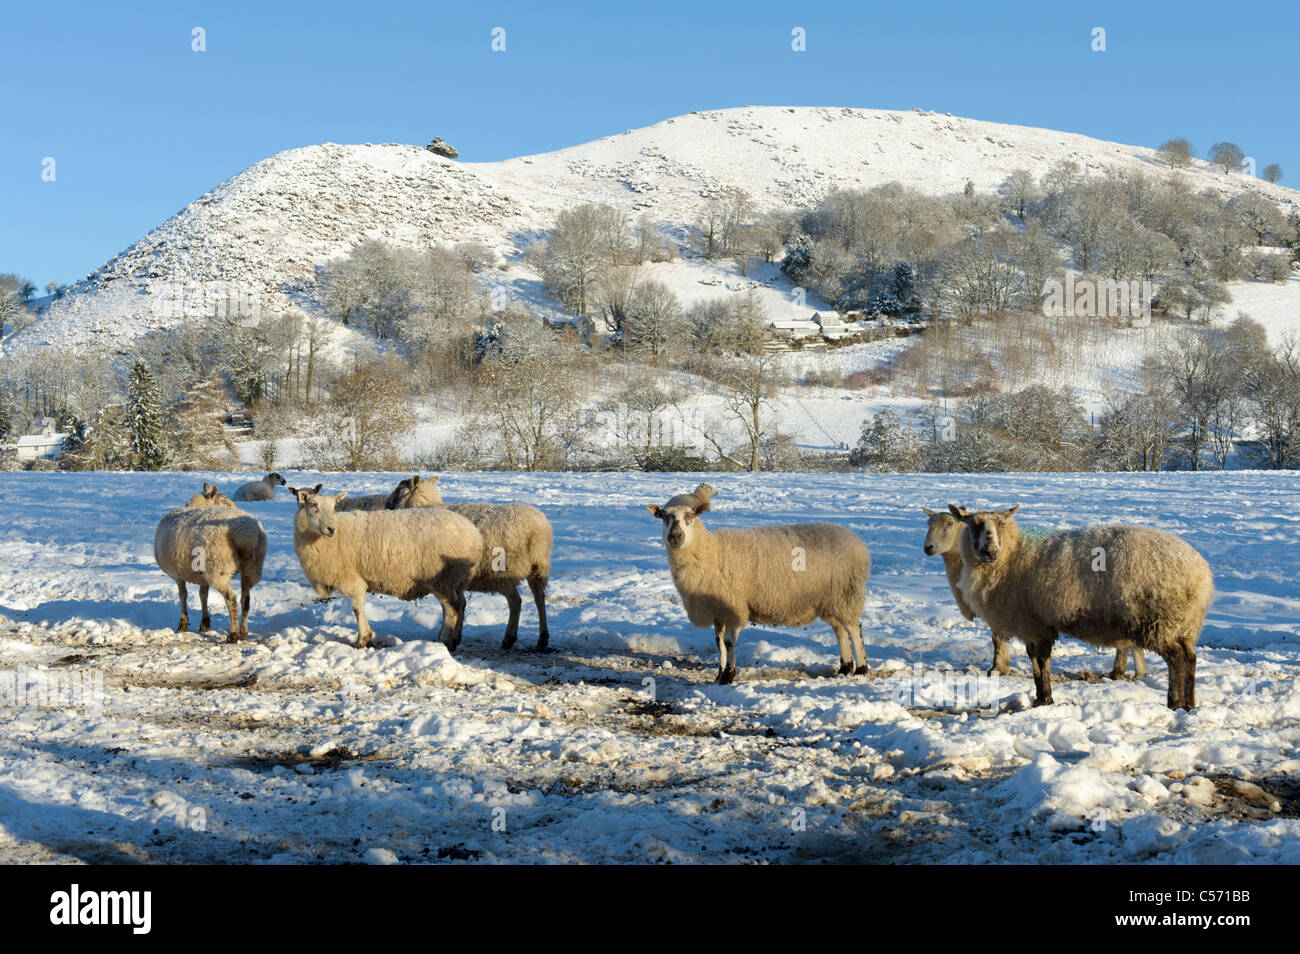 Sheep in snow, winter, Wales Stock Photo